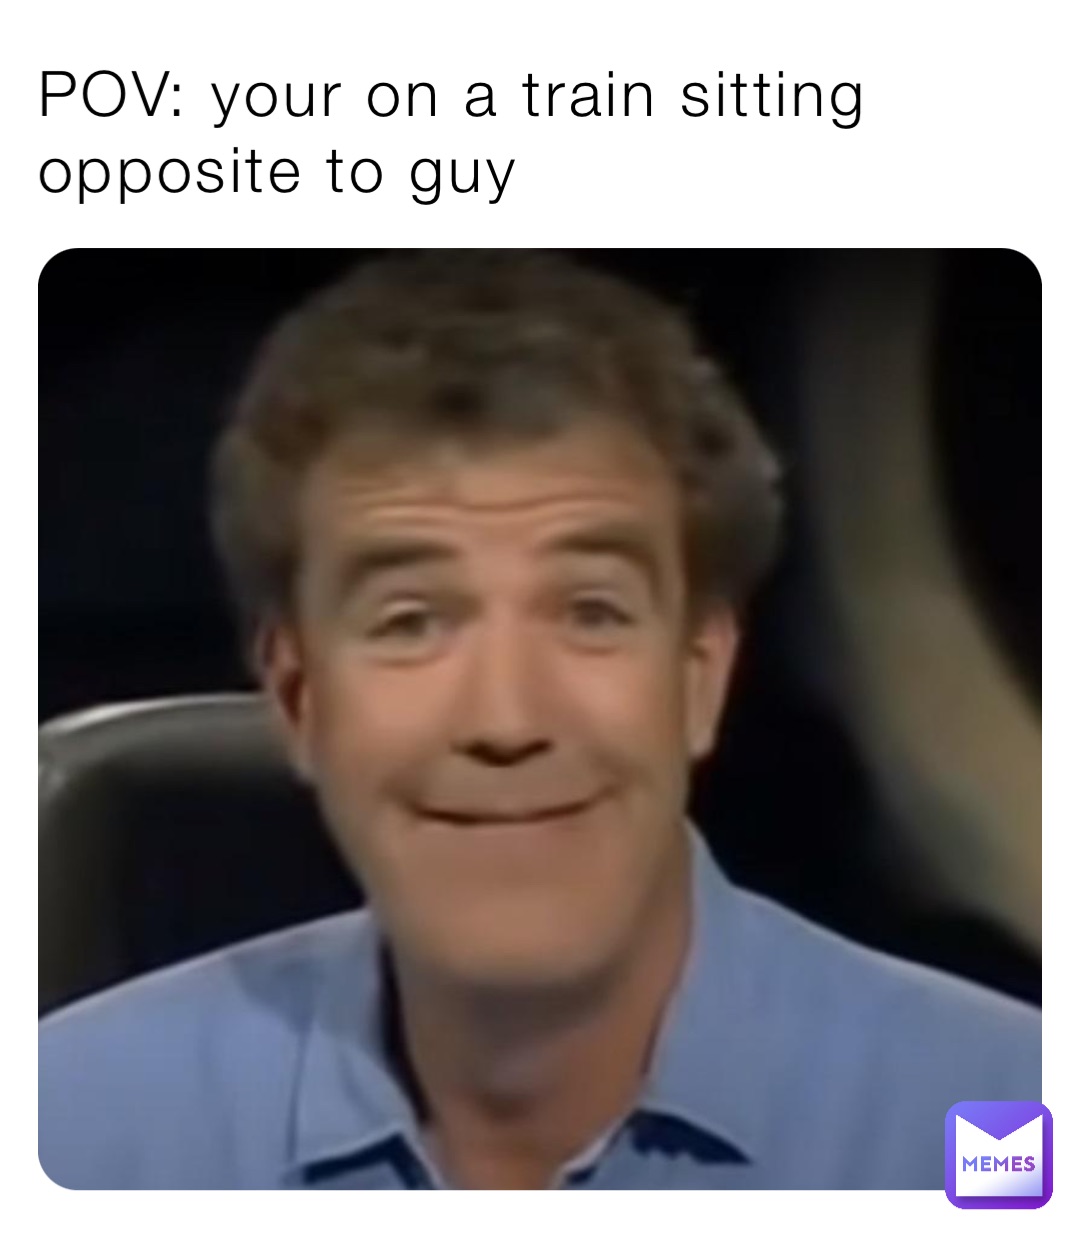 POV: your on a train sitting opposite to guy